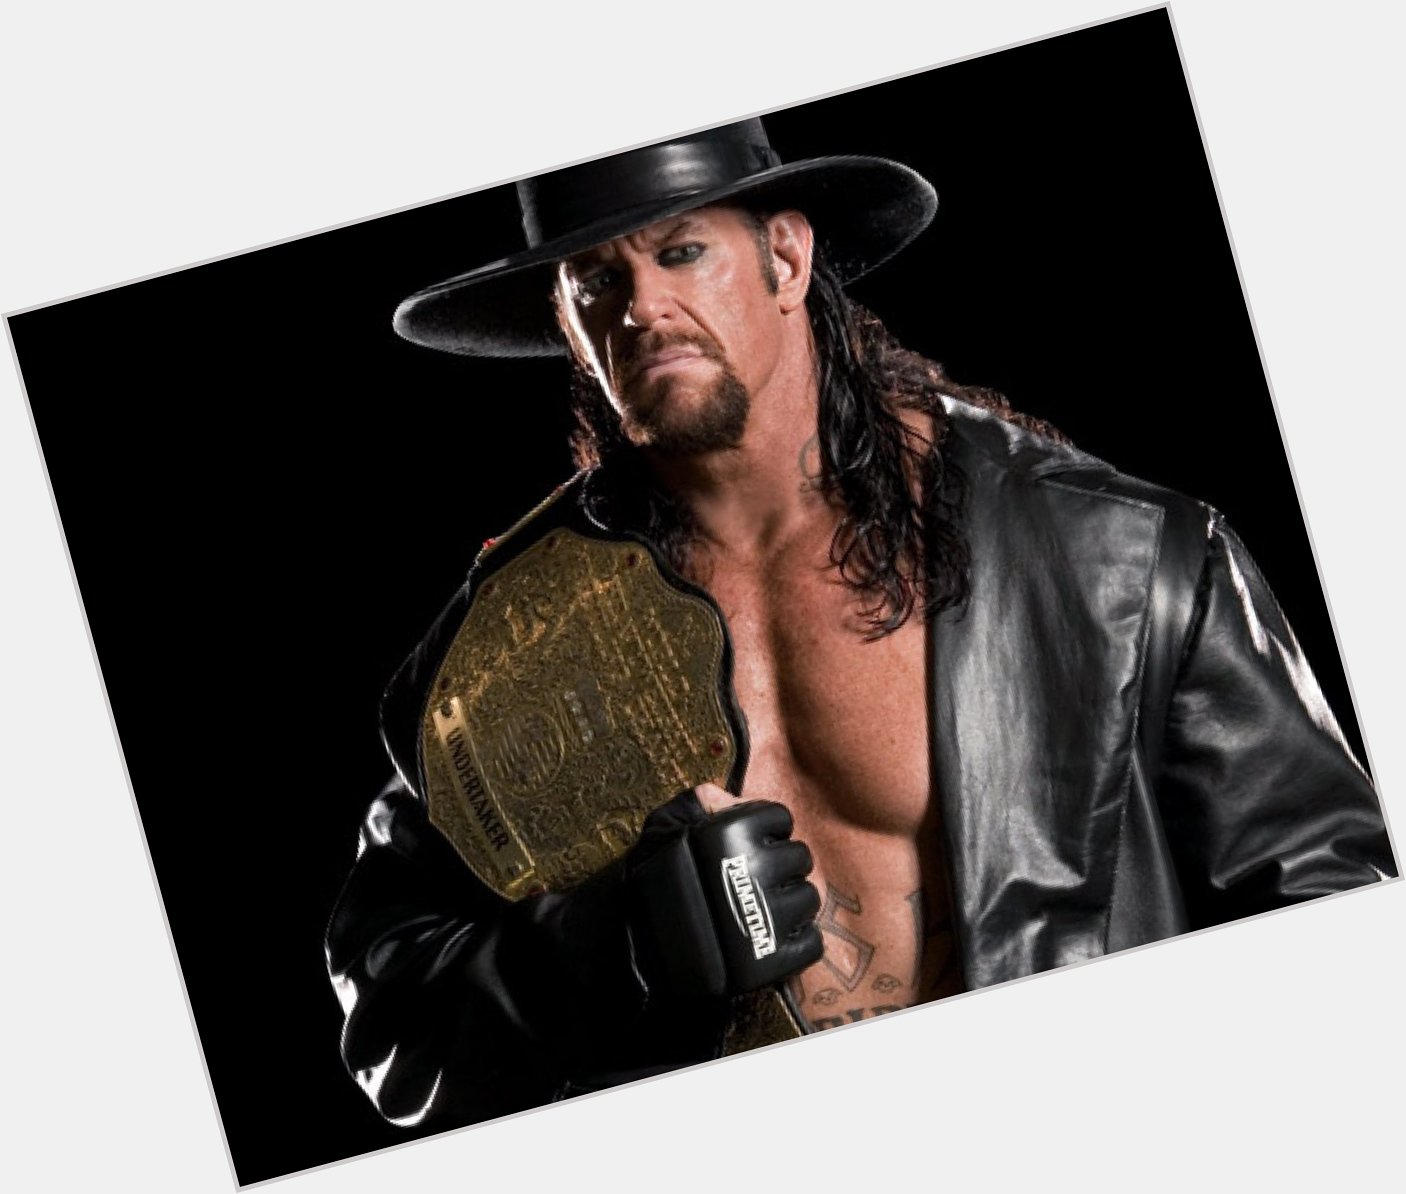 Happy Birthday to The Undertaker, who turns 51 today! 